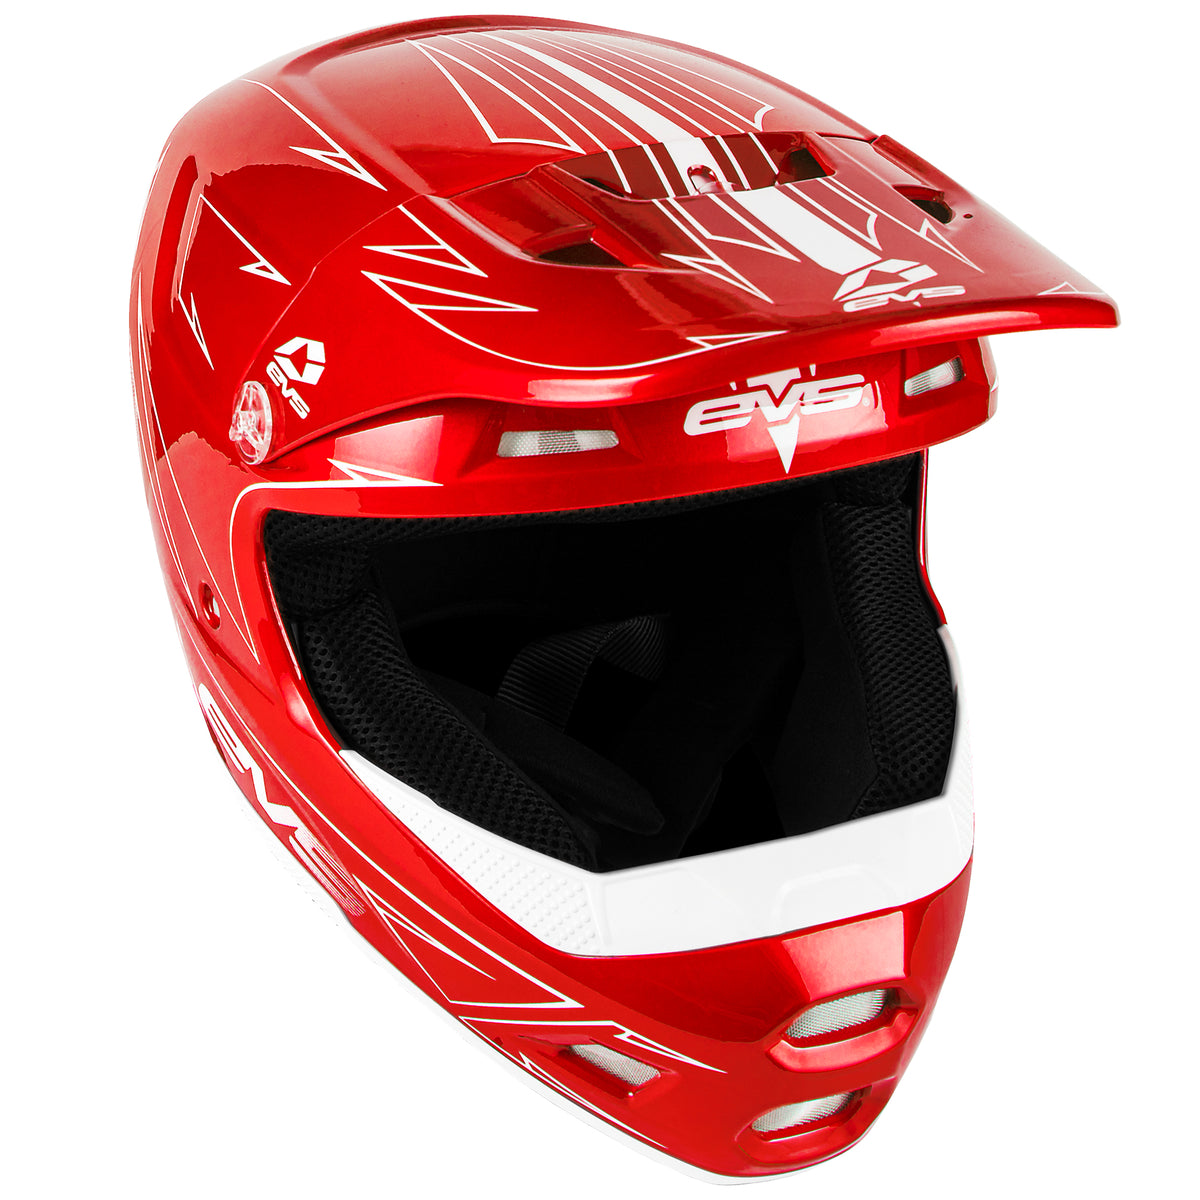 T3 Youth Helmet - Pinner Red - EVS Sports